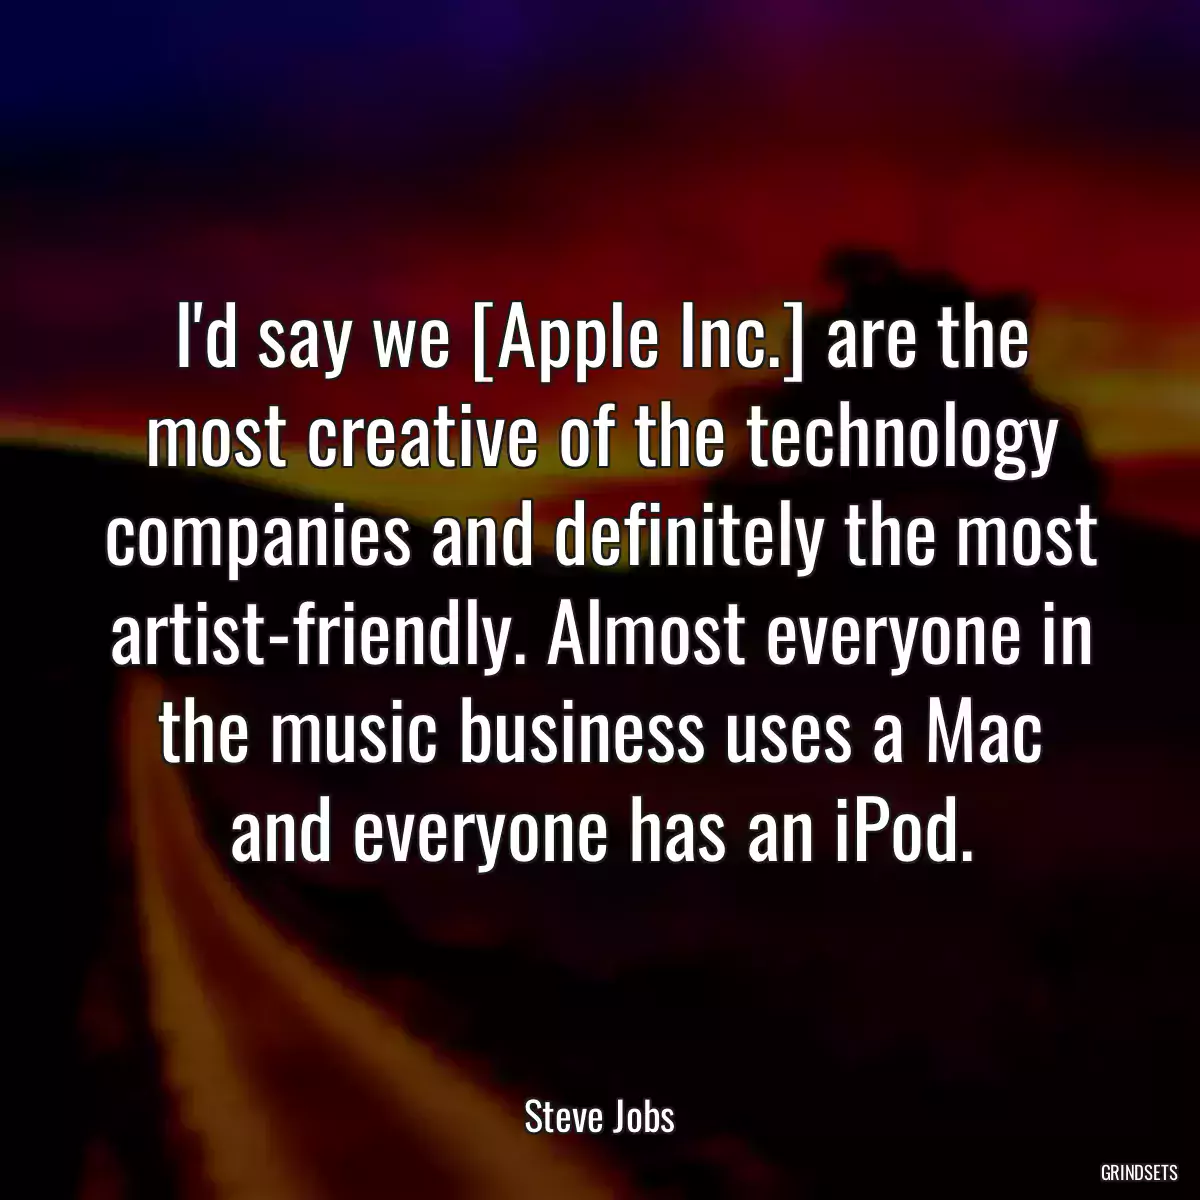 I\'d say we [Apple Inc.] are the most creative of the technology companies and definitely the most artist-friendly. Almost everyone in the music business uses a Mac and everyone has an iPod.